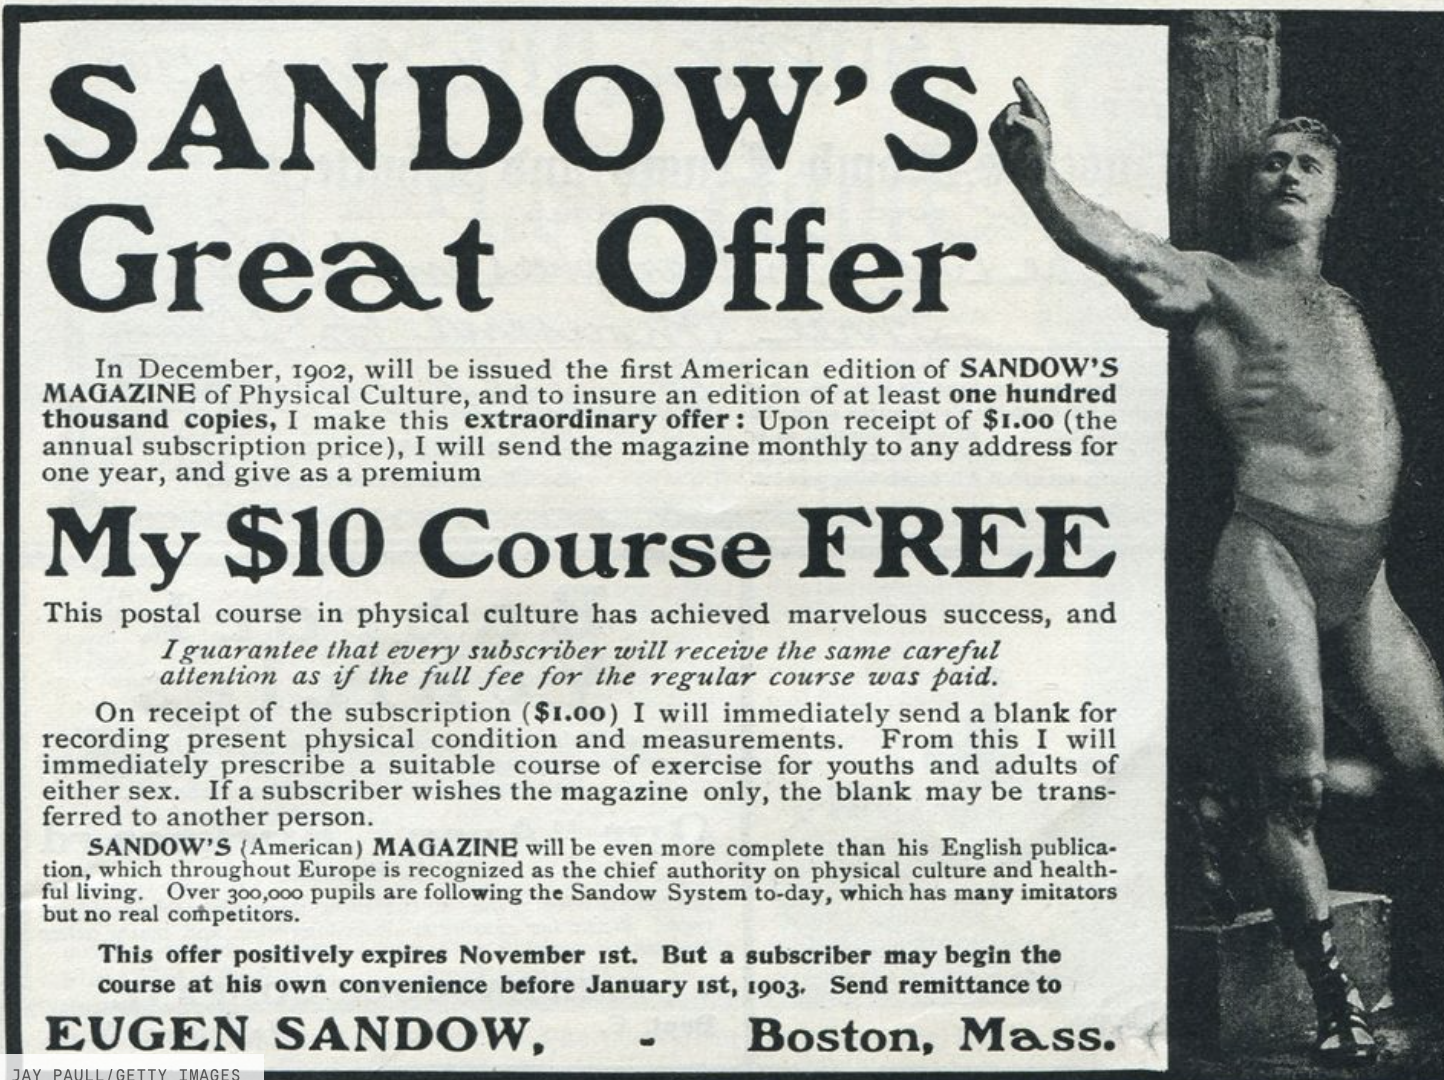 newspaper - Sandow'S Great Offer In , will be issued the first American edition of Sandow'S Magazine of Physical Culture, and to insure an edition of at least one hundred thousand copies, I make this extraordinary offer Upon receipt of $1.00 the annual su